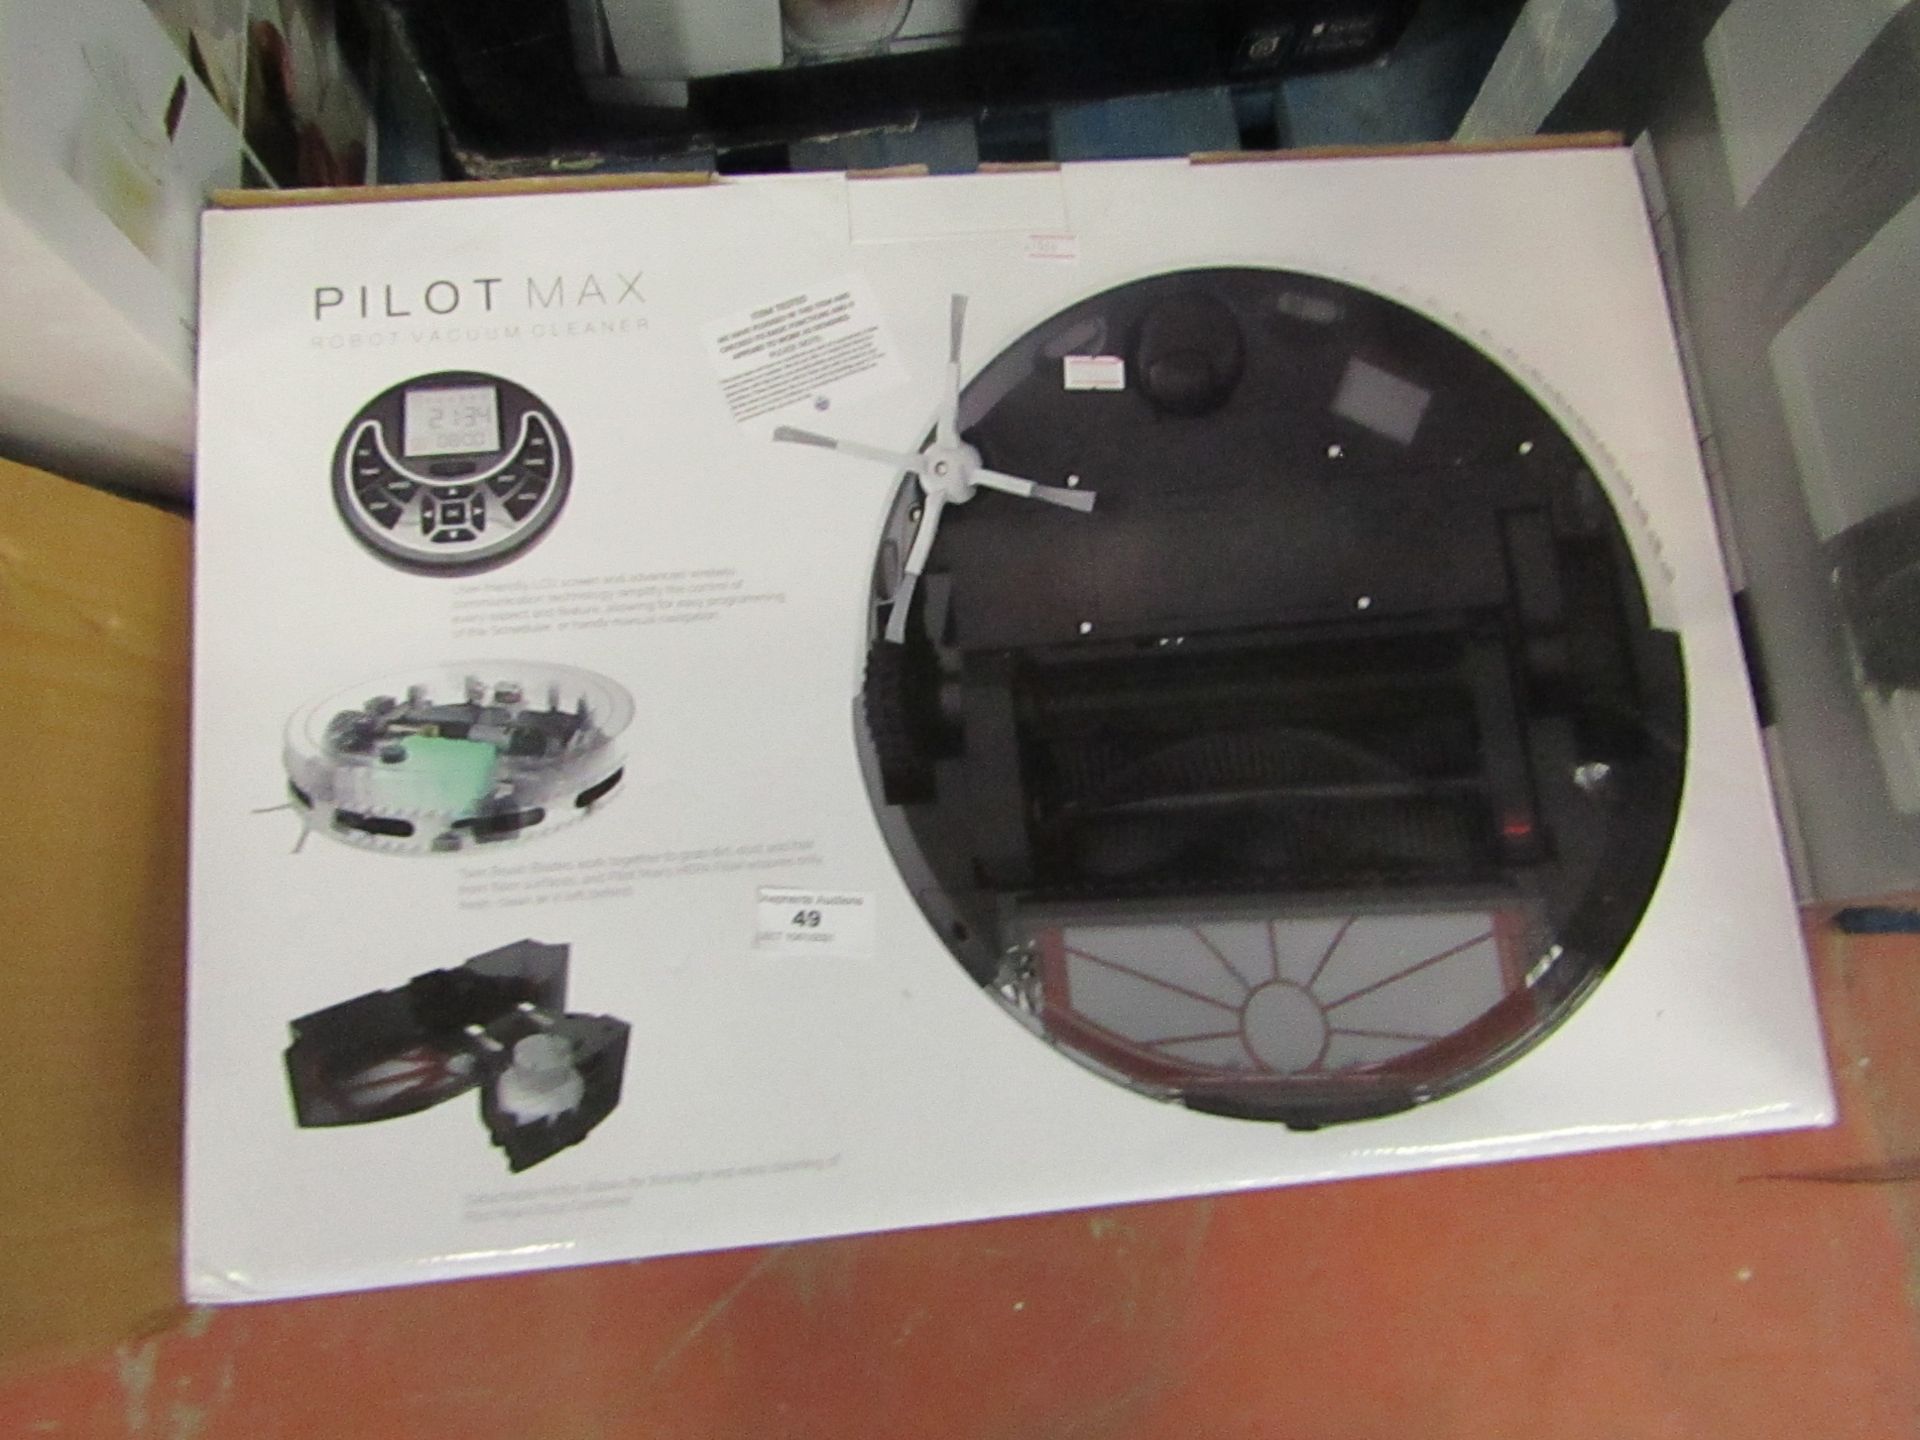 Pilot Max robot vacuum cleaner, powers on but not tested all functions and boxed. RRP £195.00